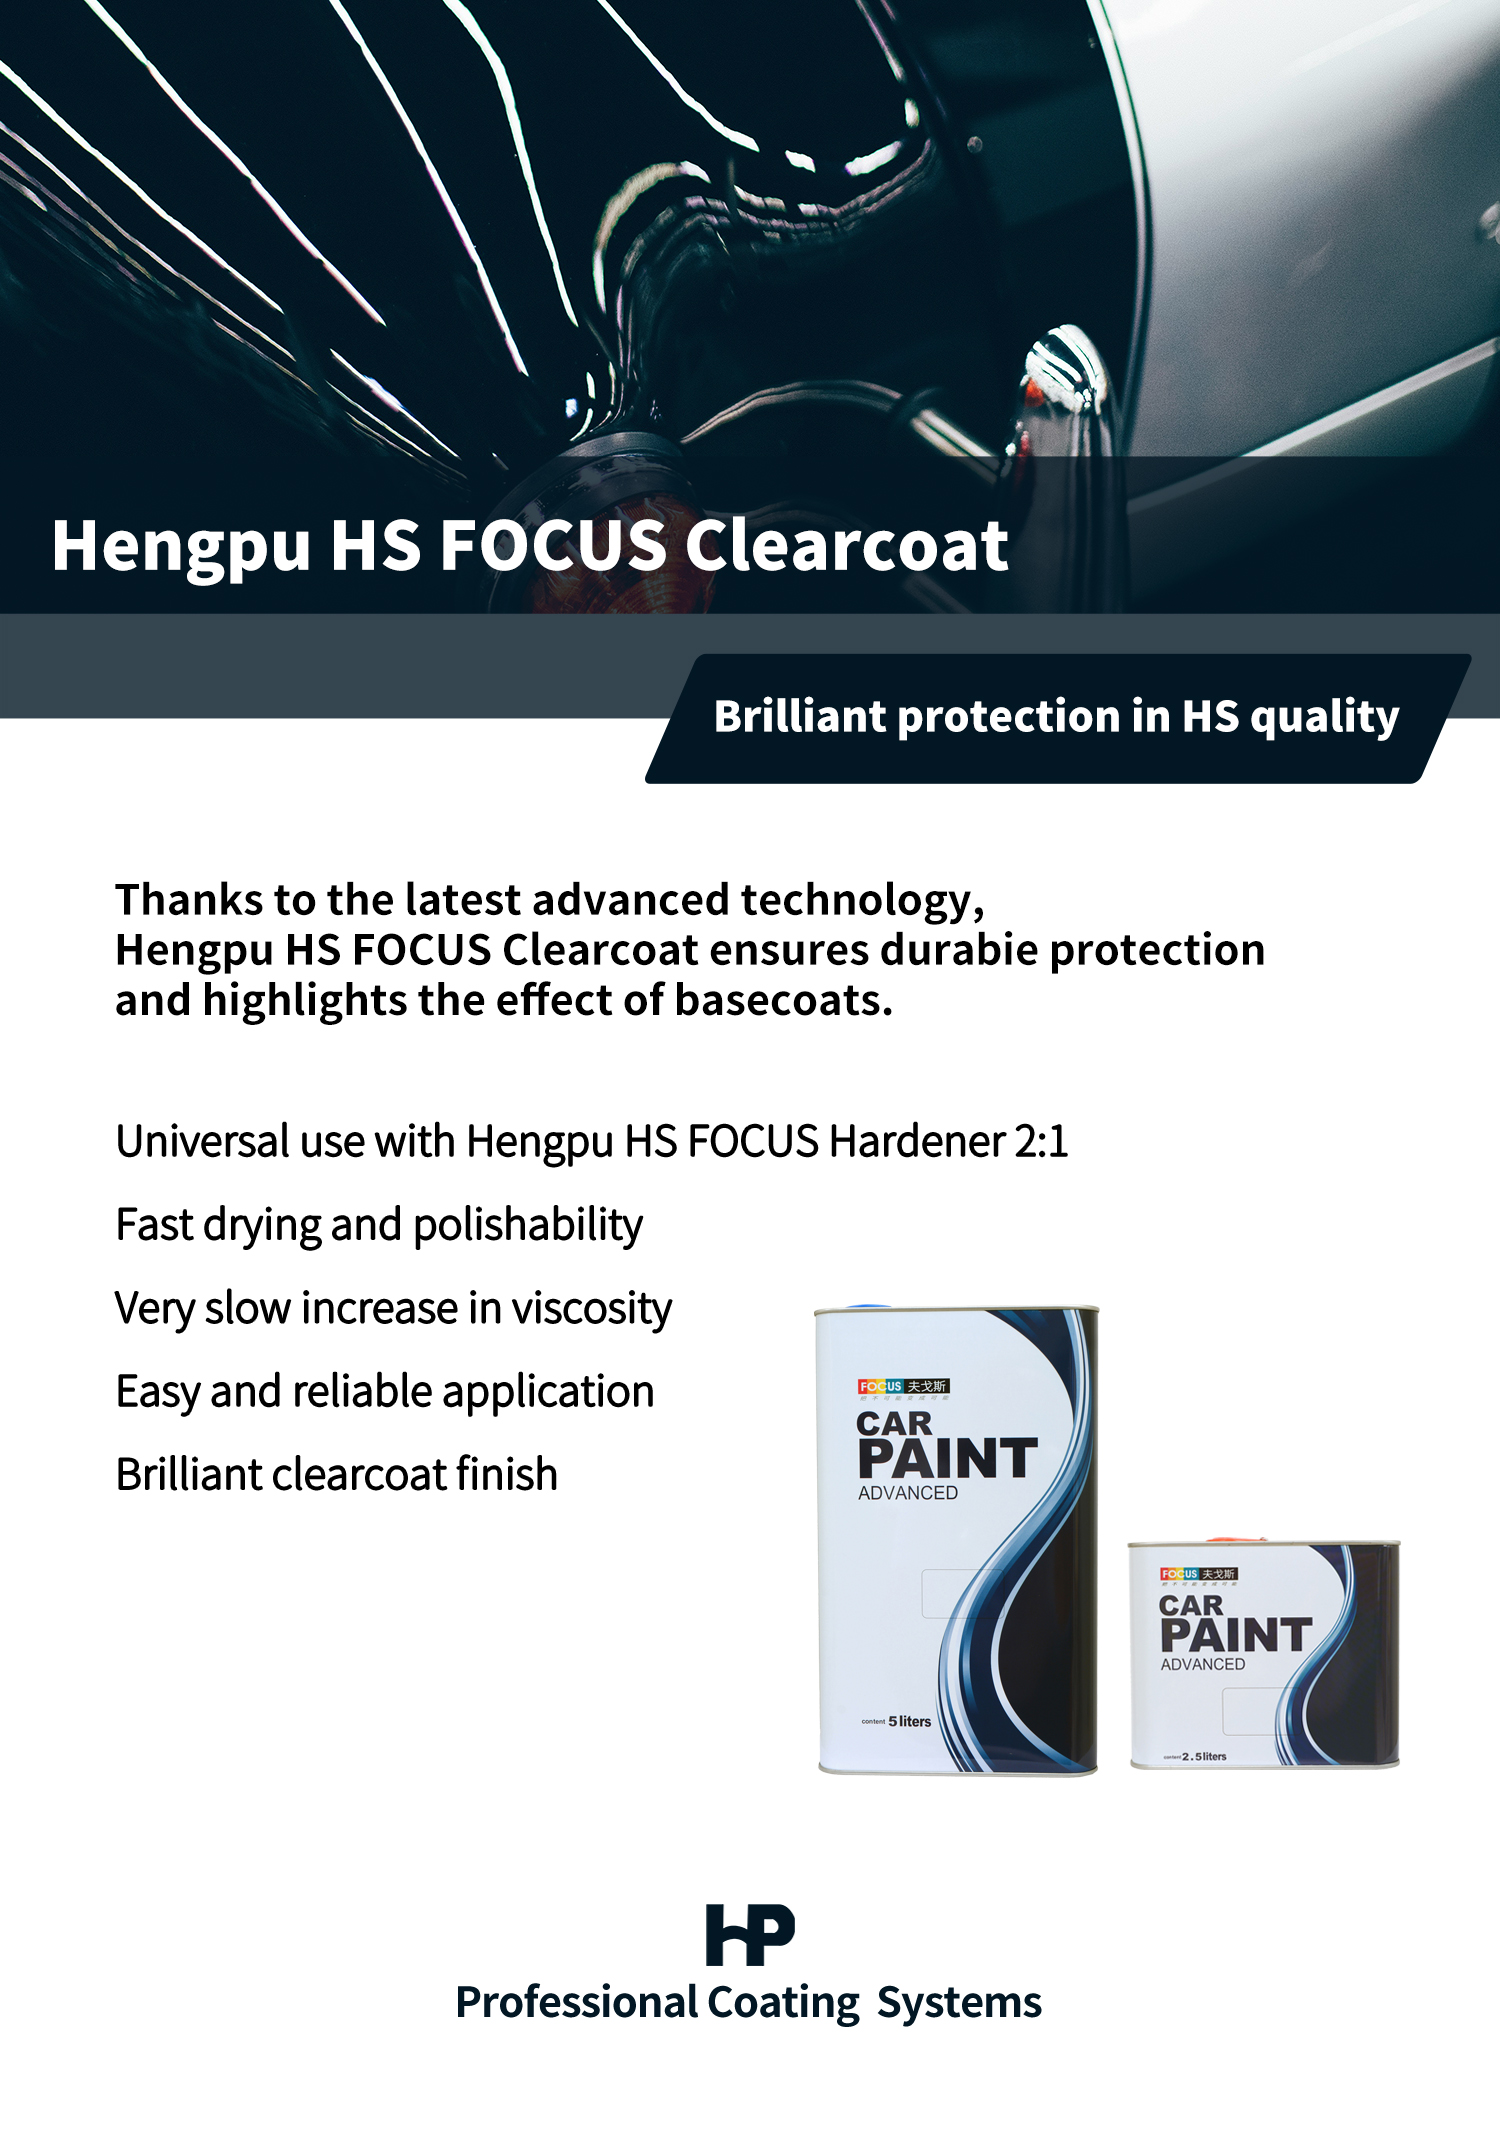 High Application High Gloss Auto Paint Easy Operation High Plumpness Car Paint FILRE HS Highlighting Clearcoat